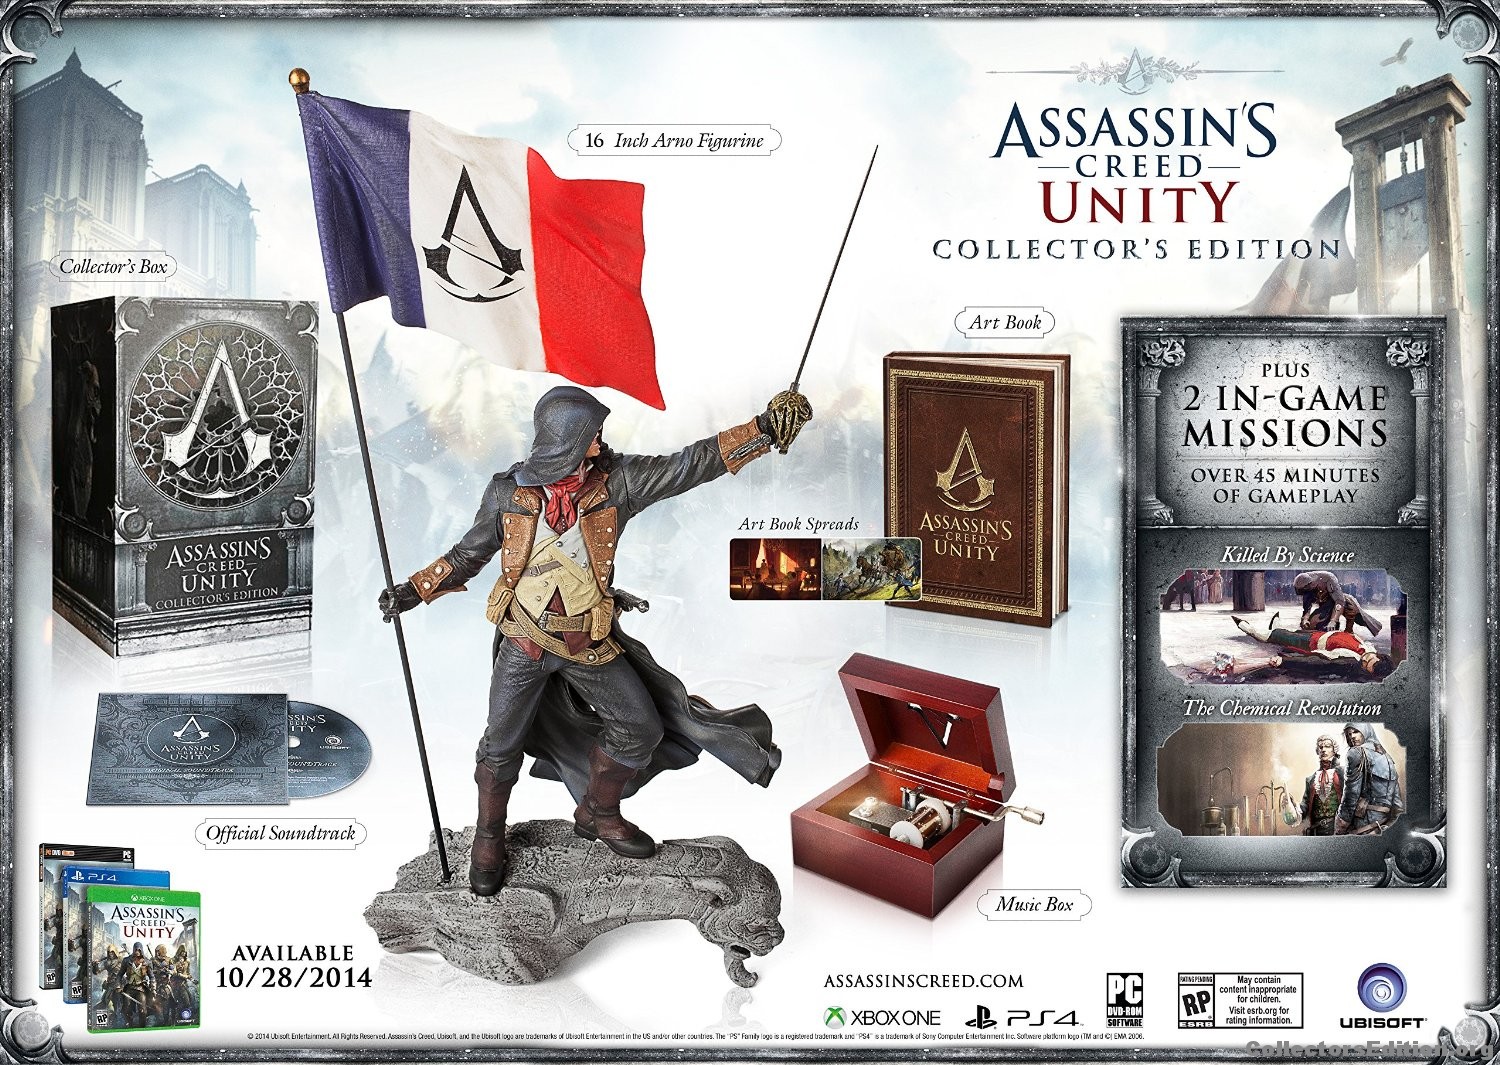 Playstation 4 - Assassin's Creed Unity [Limited Edition]